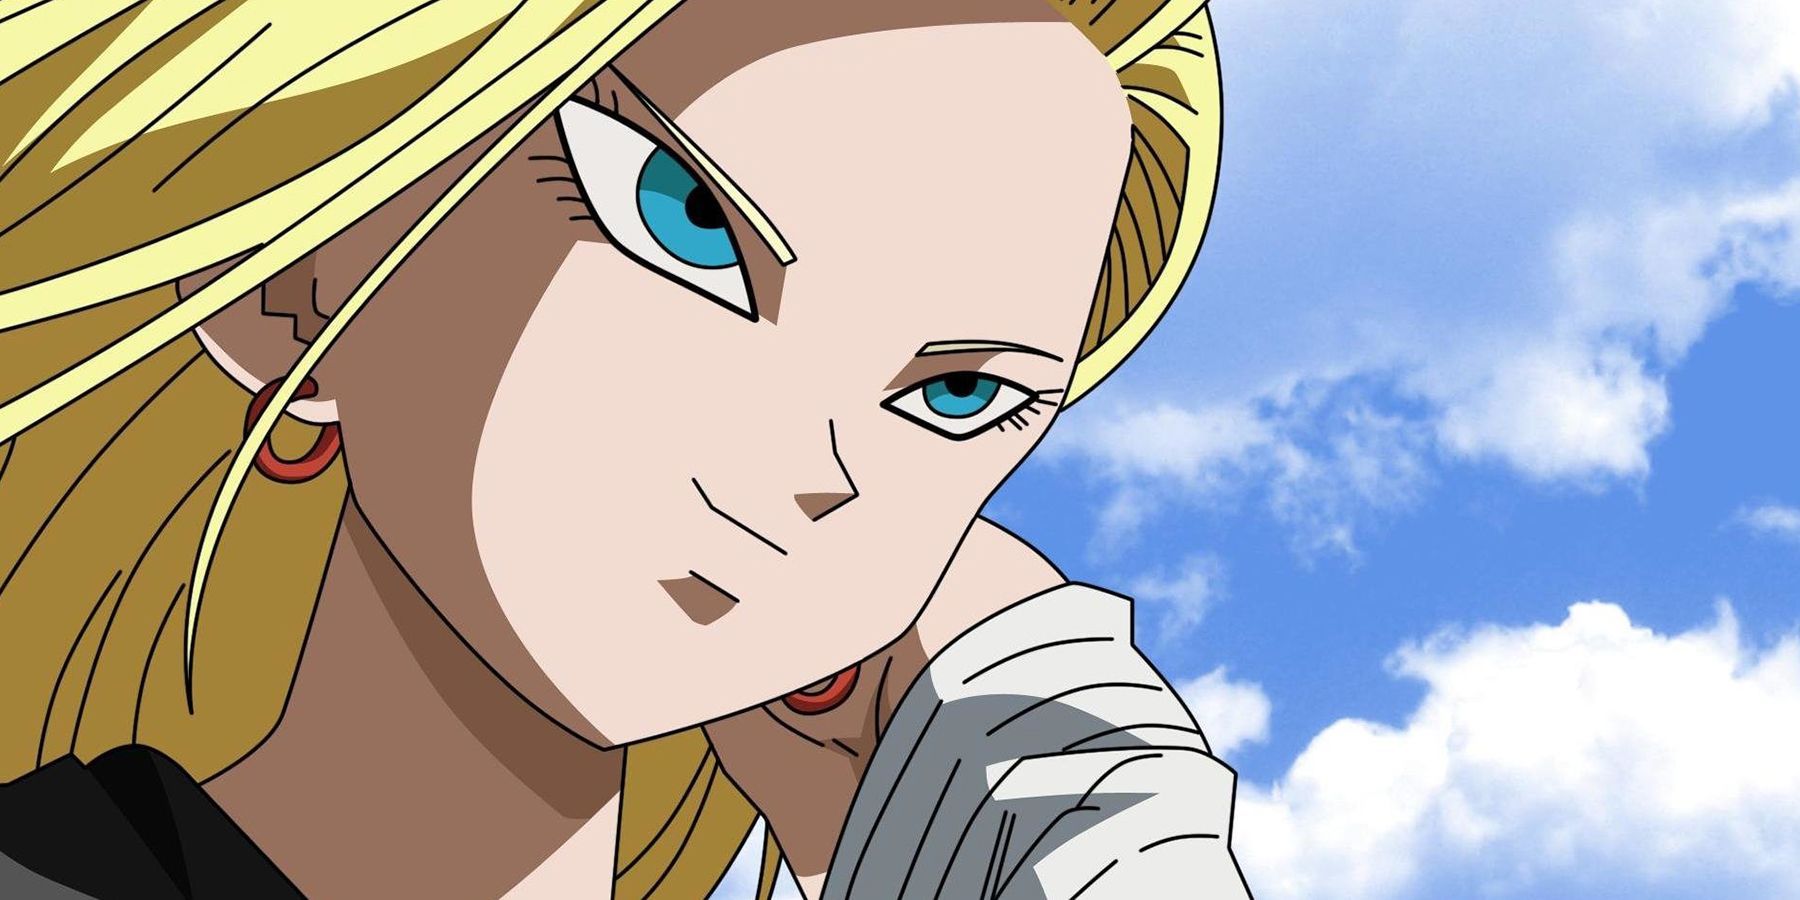 Android 18 from the Dragon Ball anime series.